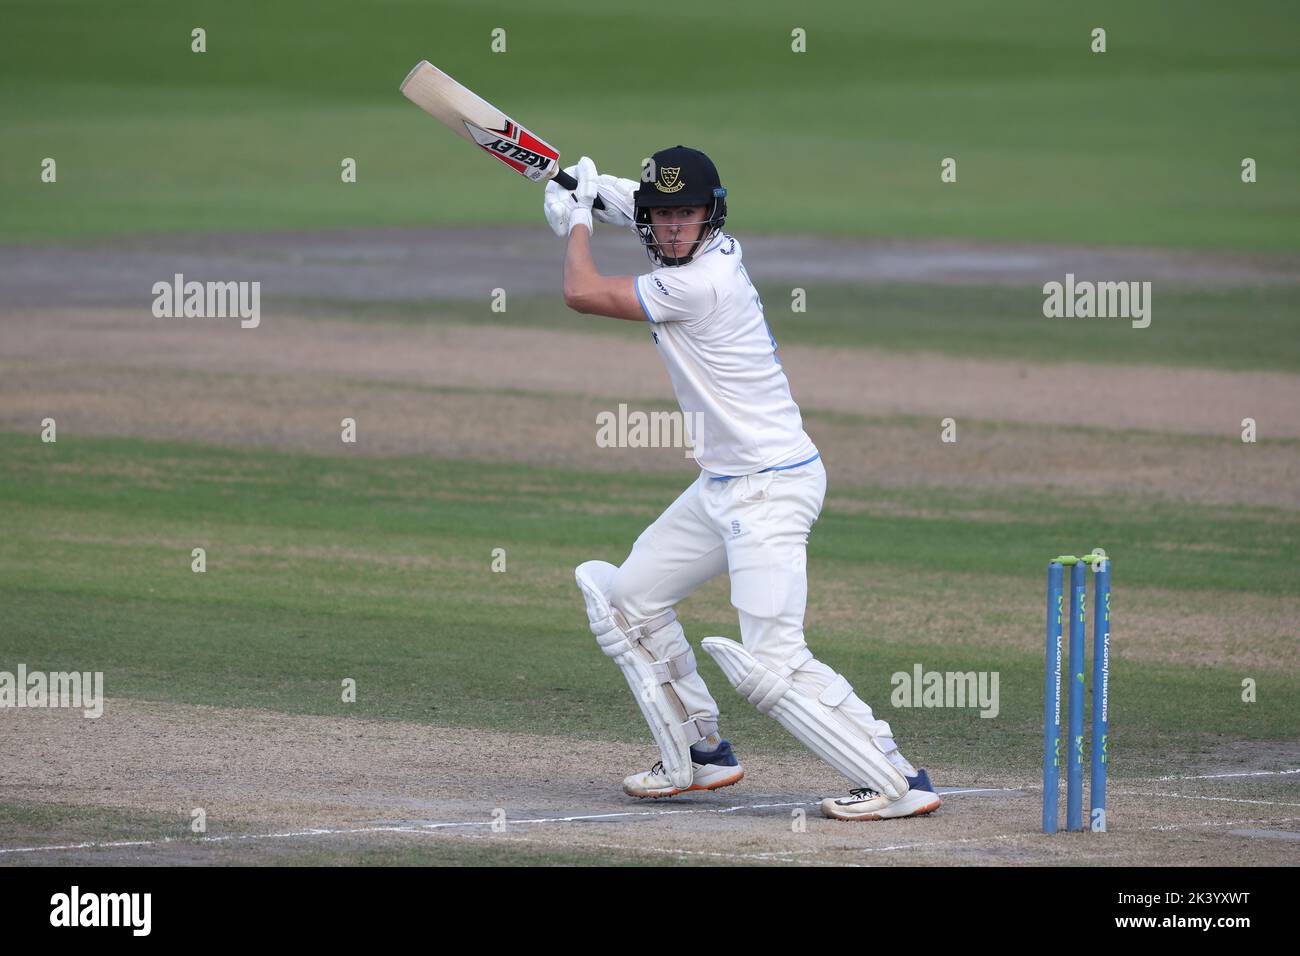 Hove, UK 28th September 2022 : Sussex's Ali Orr batting during the LV= Insurance County Championship Division Two  match between Sussex and Glamorgan at The 1st Central County Ground in Hove. Stock Photo